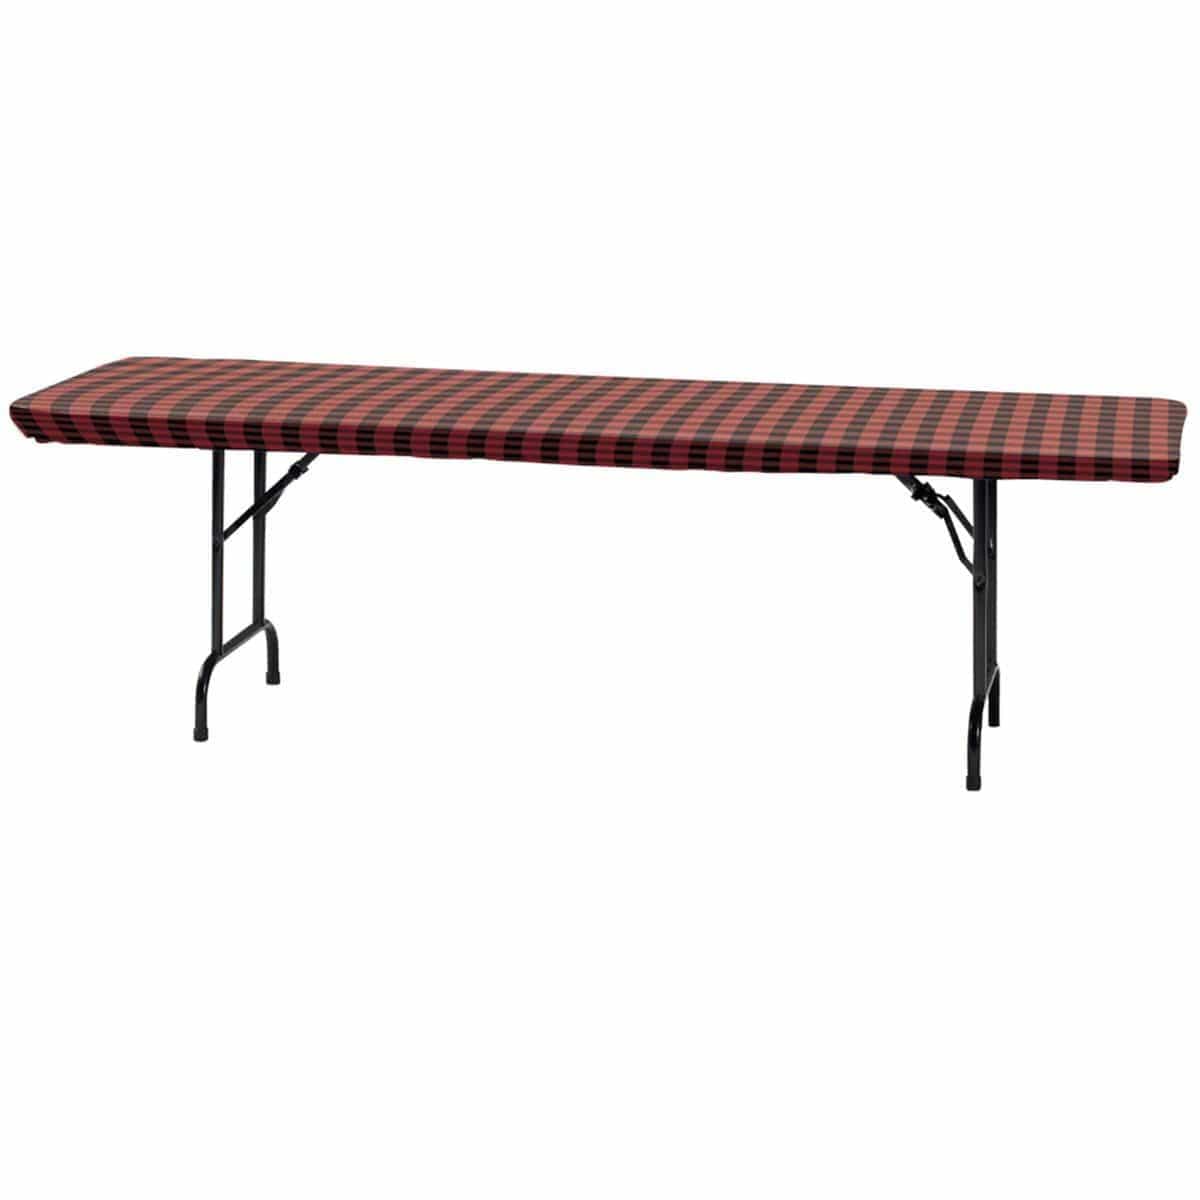 Buy Plasticware Buffalo Plaid Stay-Put Tablecover sold at Party Expert